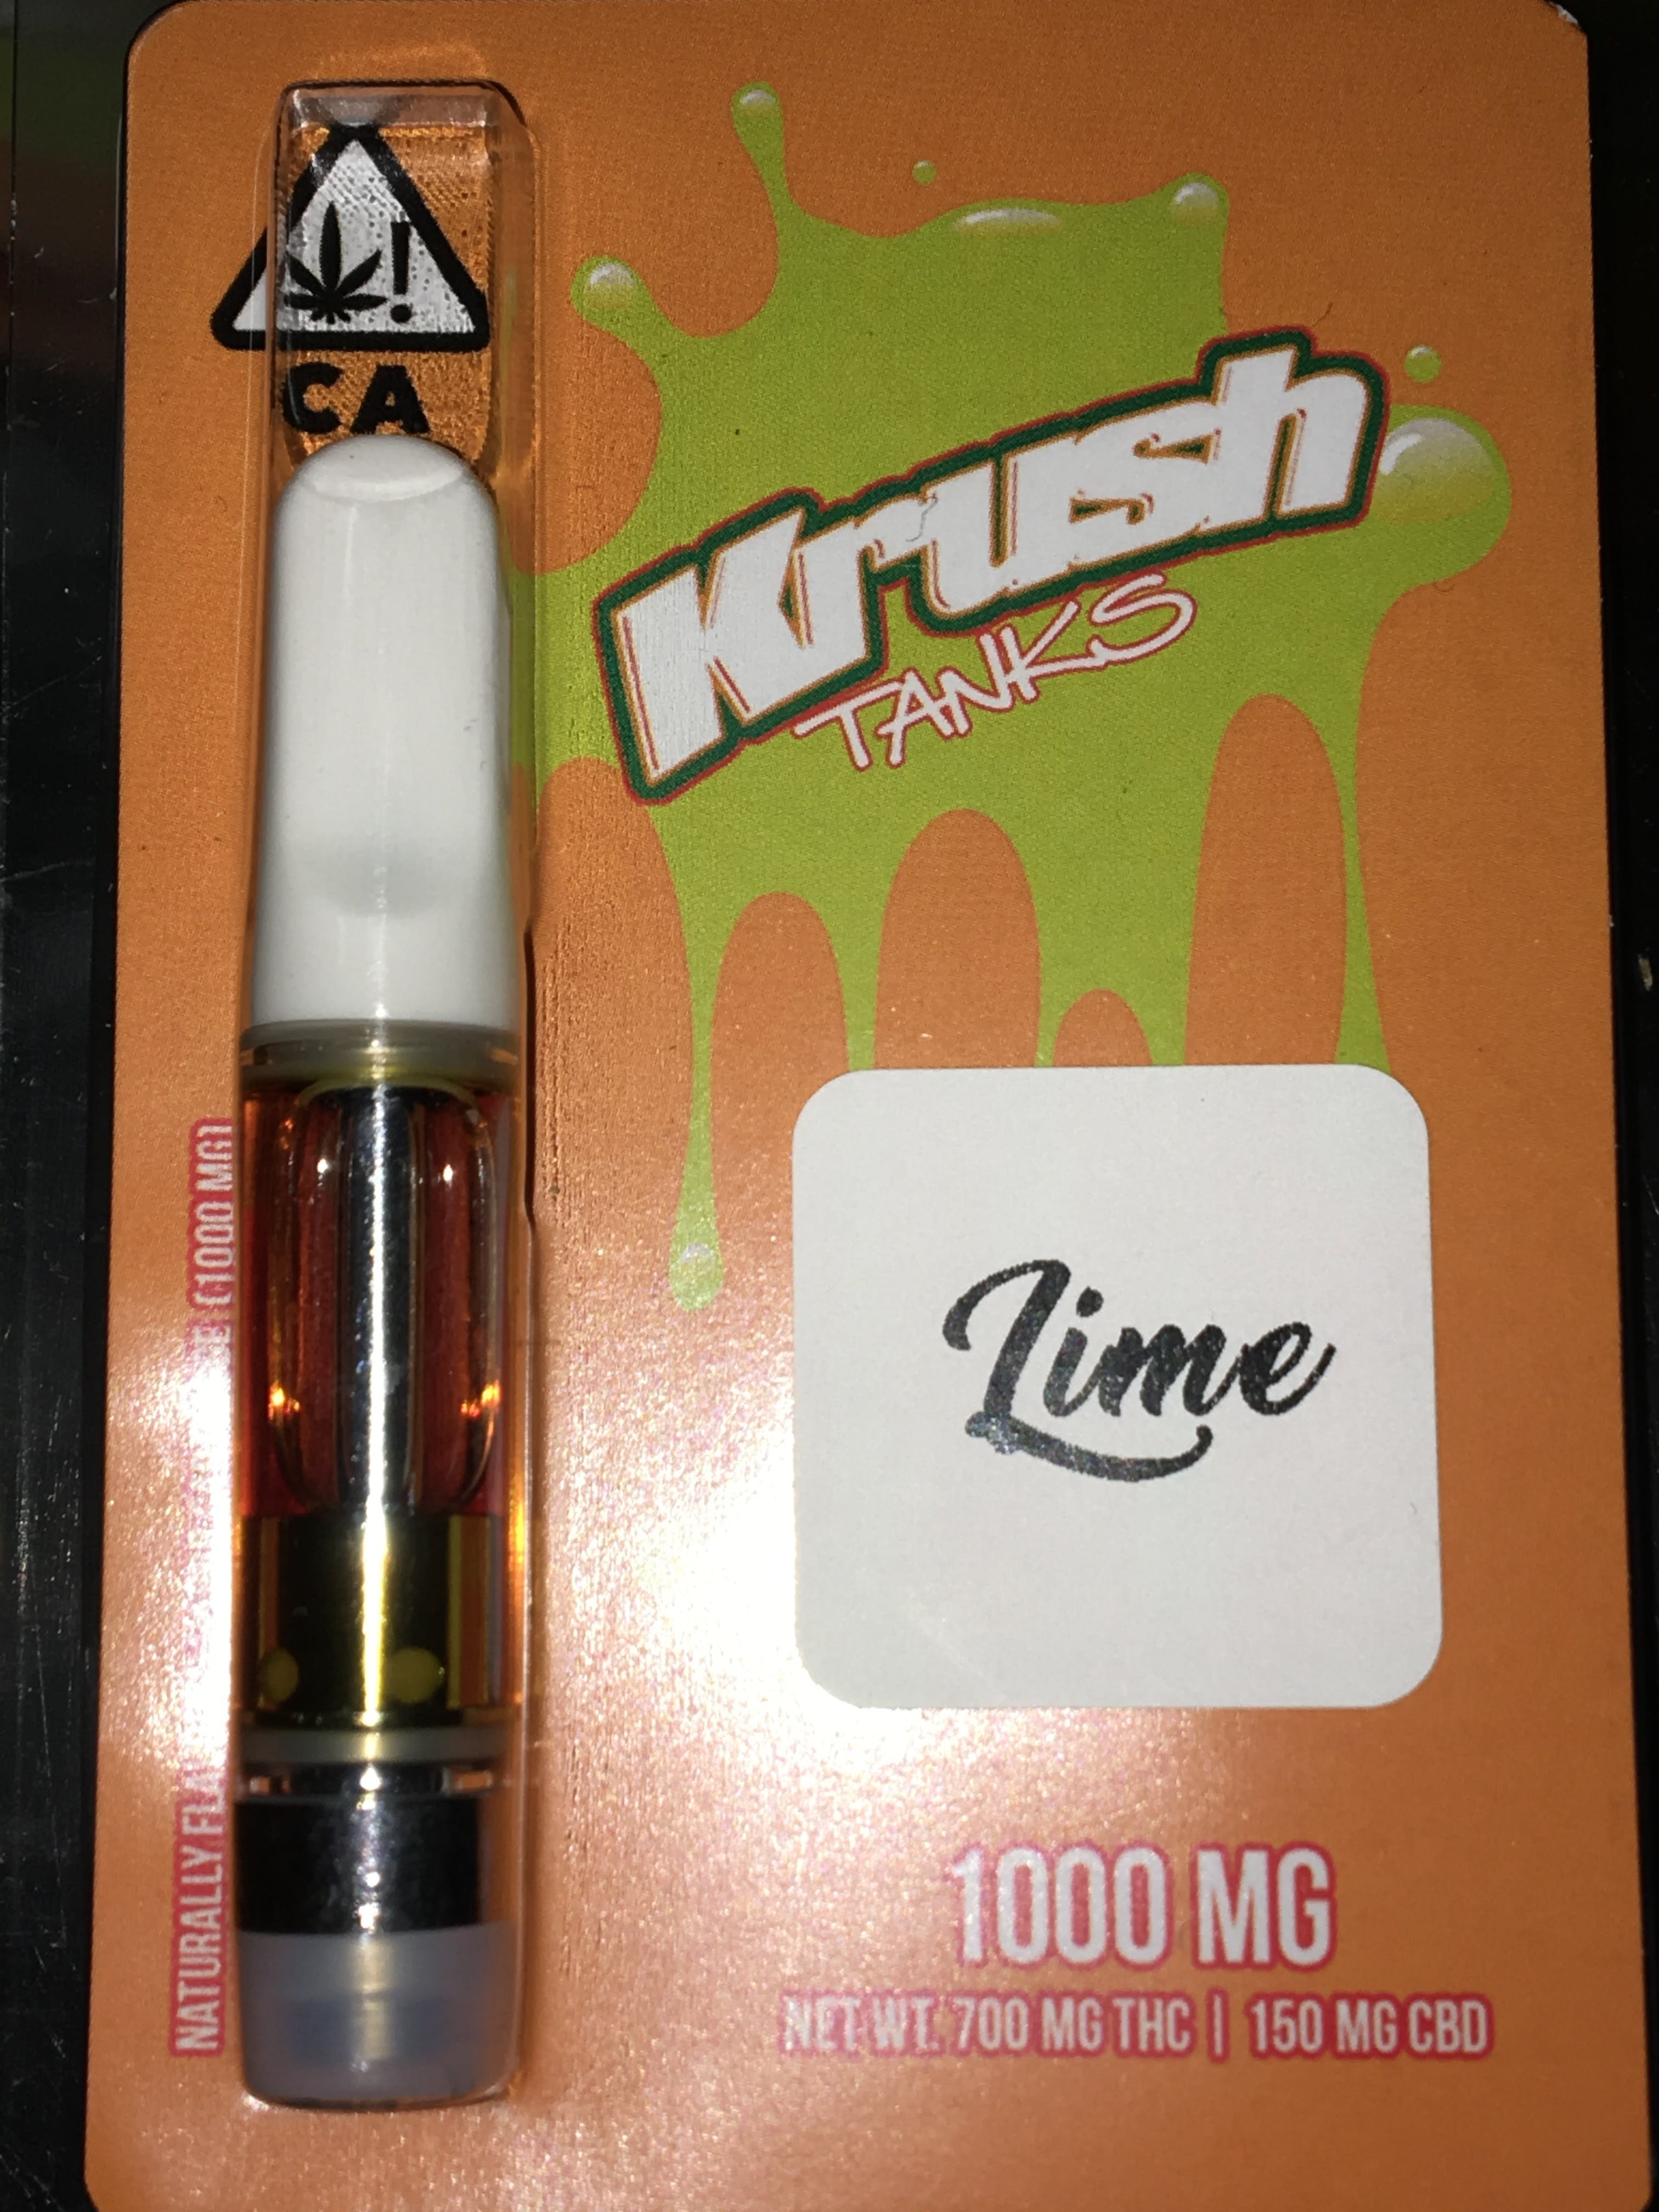 concentrate-krush-cans-lime-1g-vape-cartridge-21-21-21